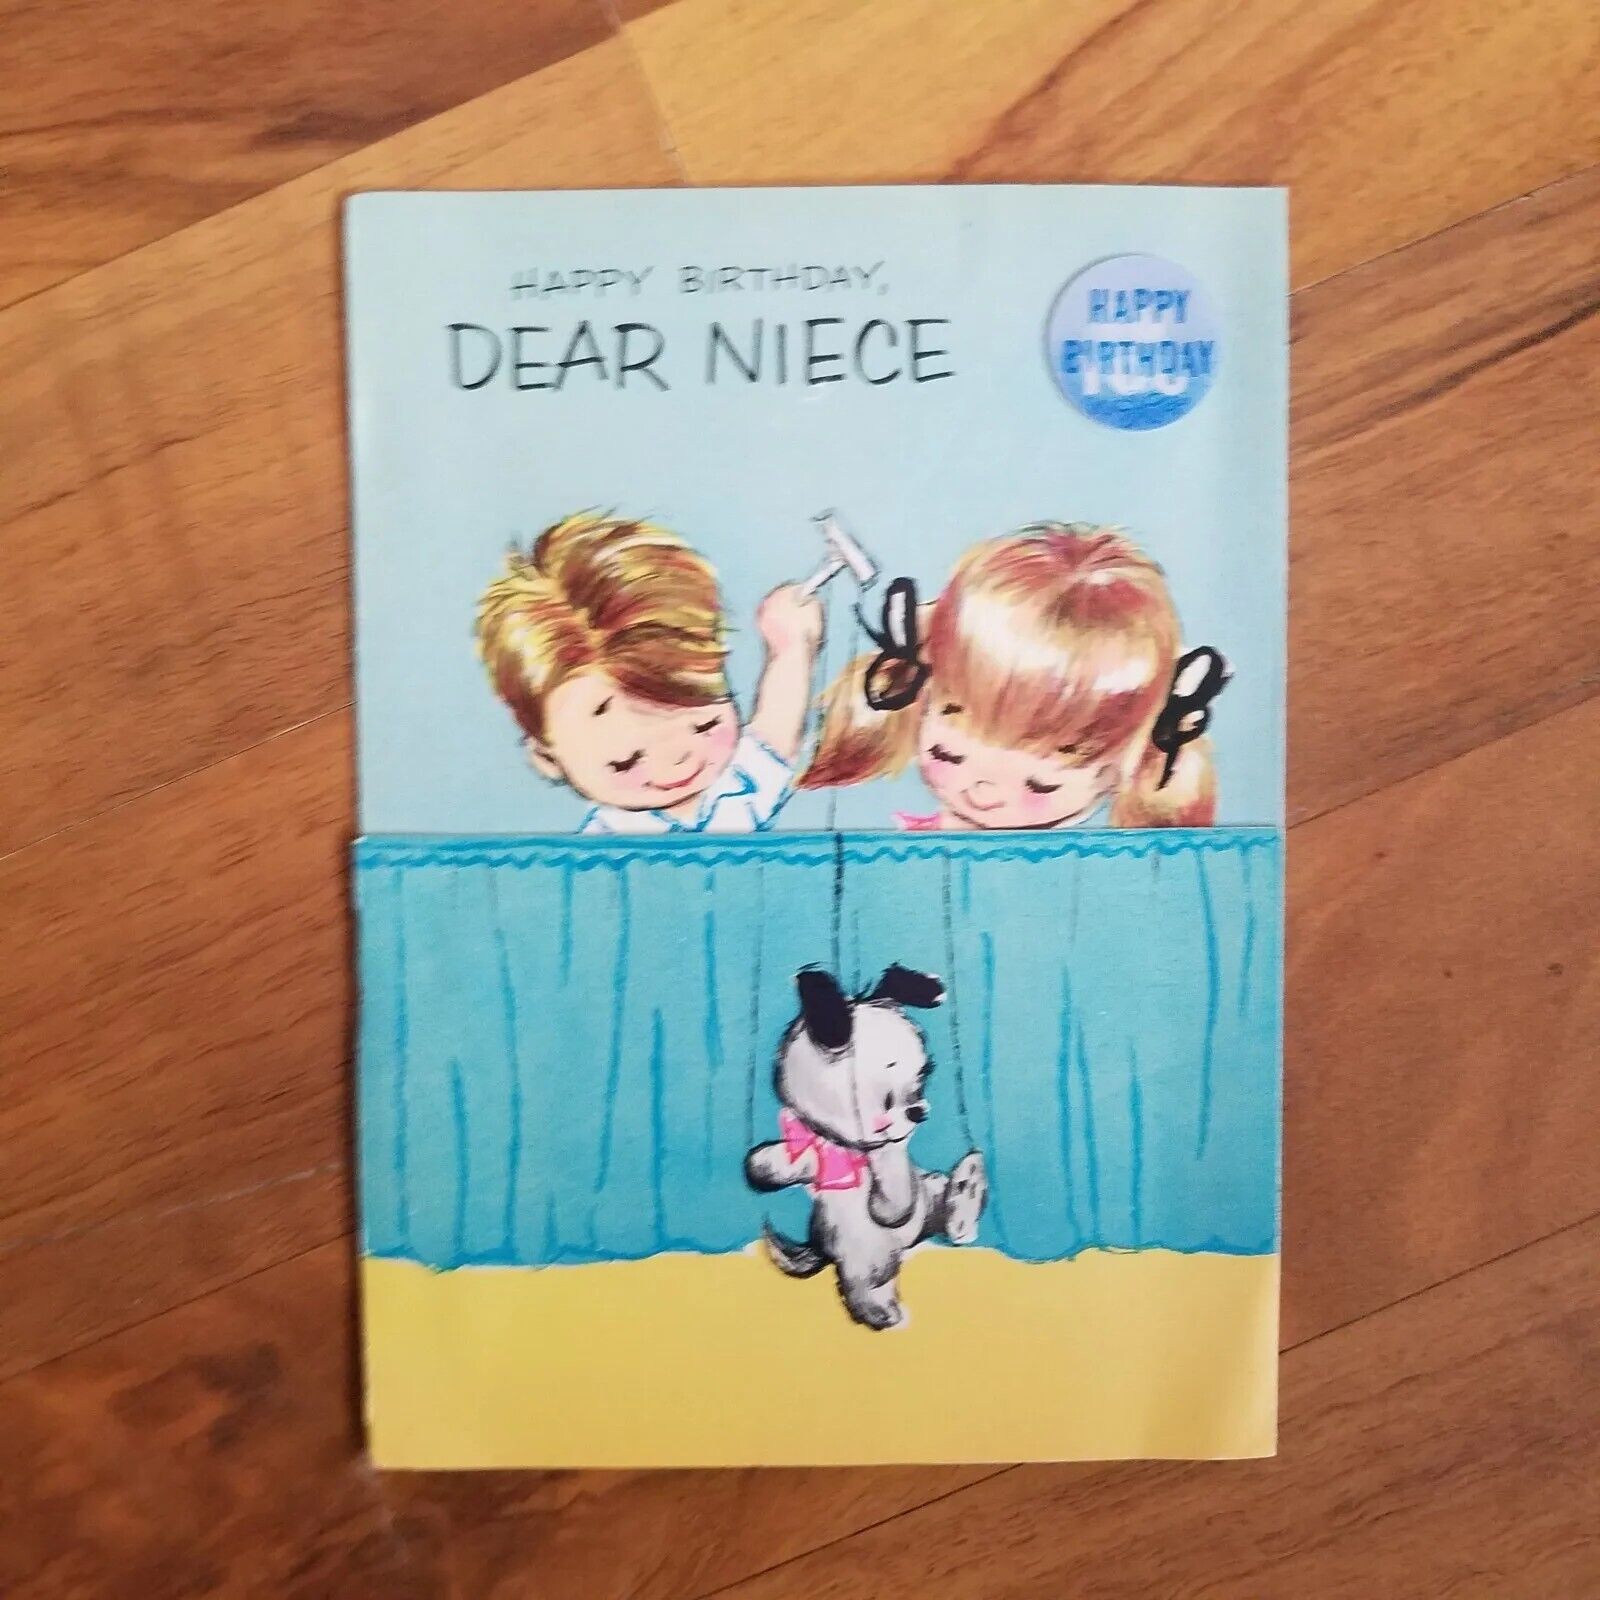 VTG 1960s BIRTHDAY CARD FOR NIECE PUPPET SHOW ANTHROPOMORPHIC CAT AND DOG TUB15 